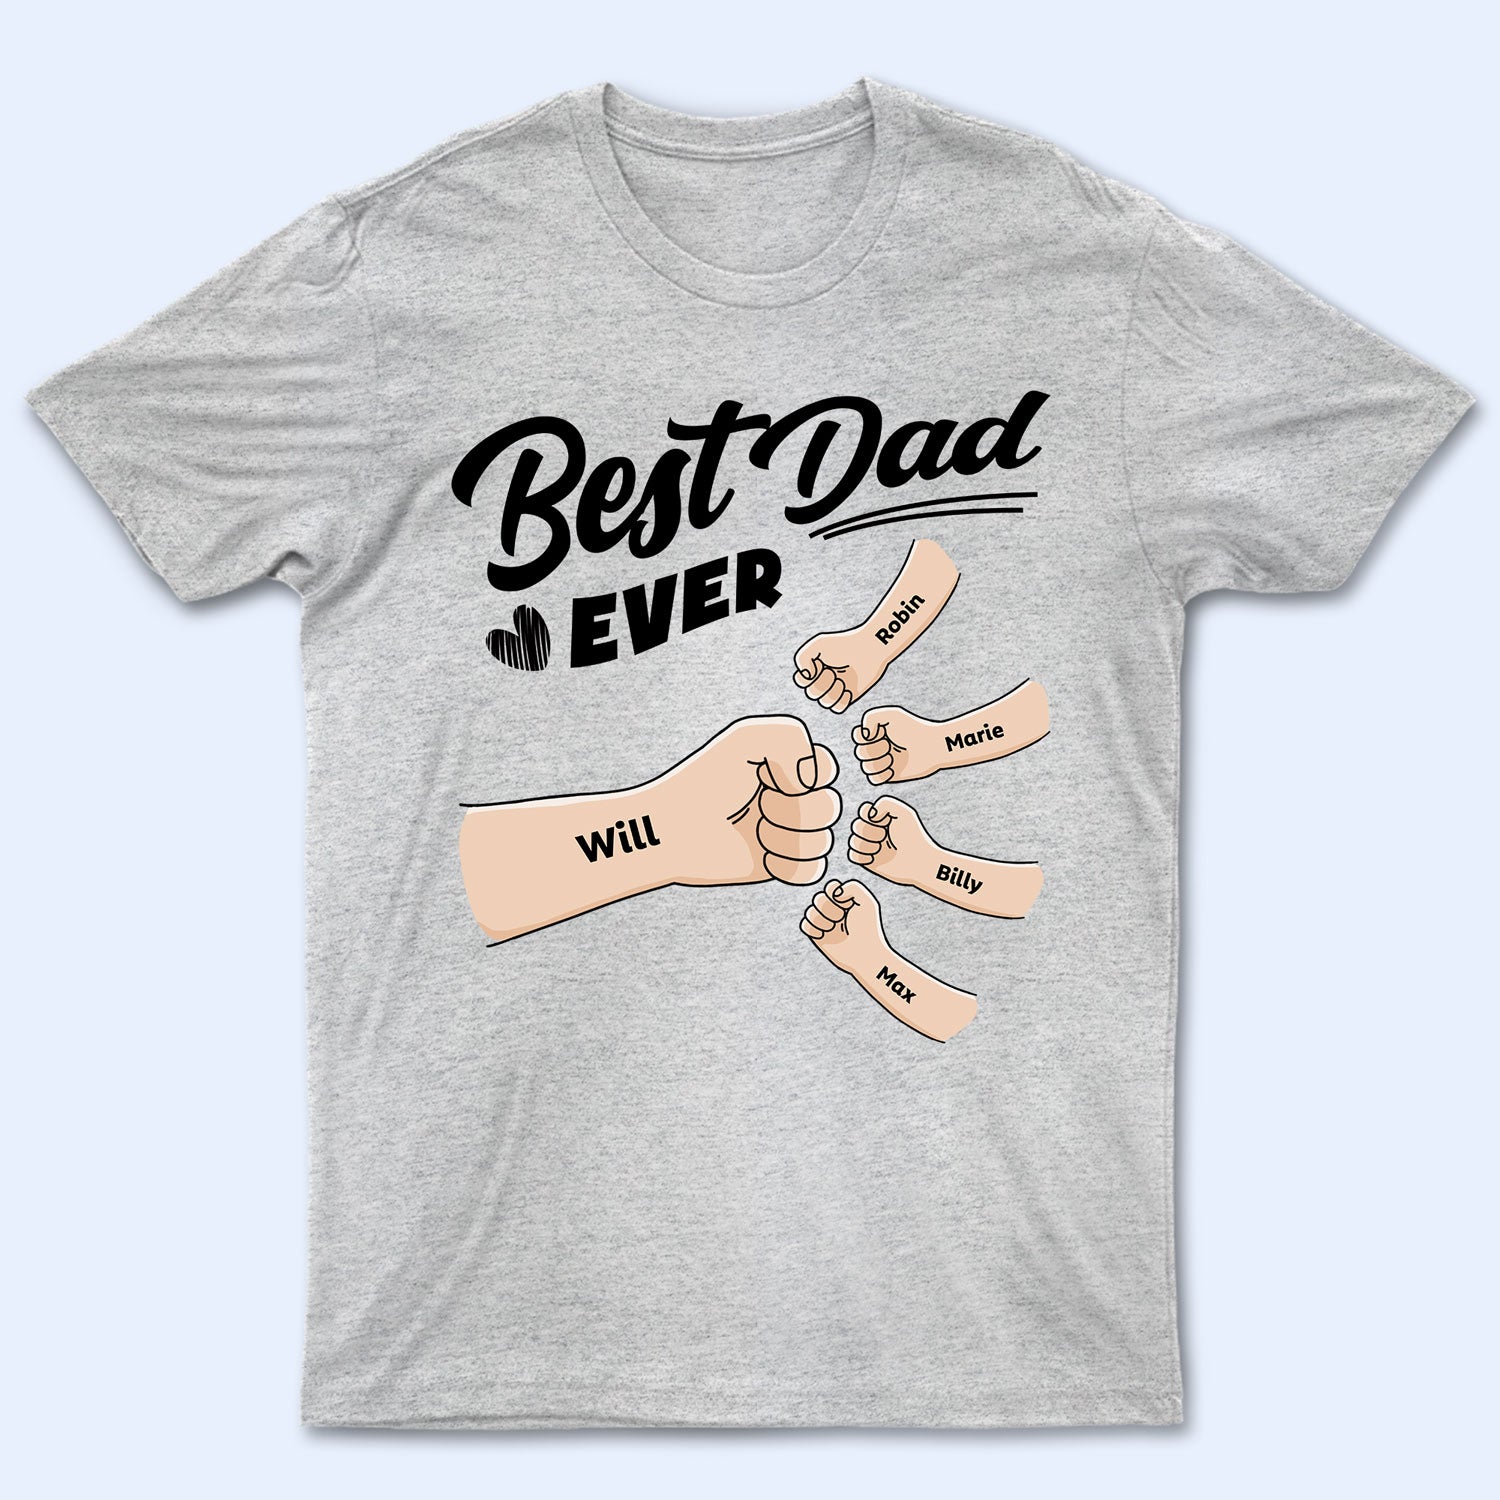 Best Dad Ever Hand Punch - Gift For Dad, Grandpa - Personalized Custom T Shirt